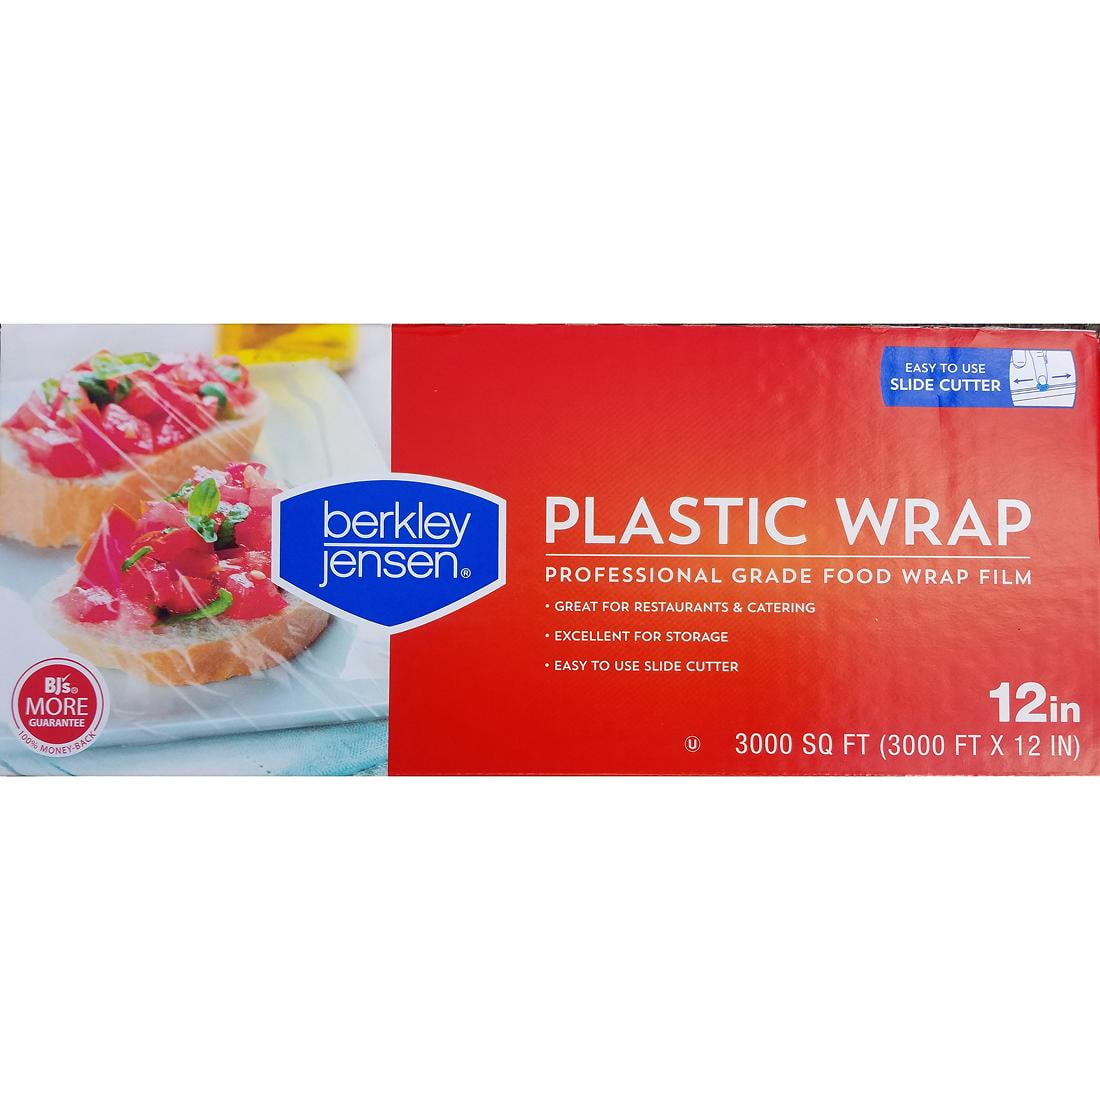  Stretch-Tite Premium Plastic Food Wrap, 500 Sq. Ft., 516.12-Ft.  x 11.5/8-Inch : Office Products